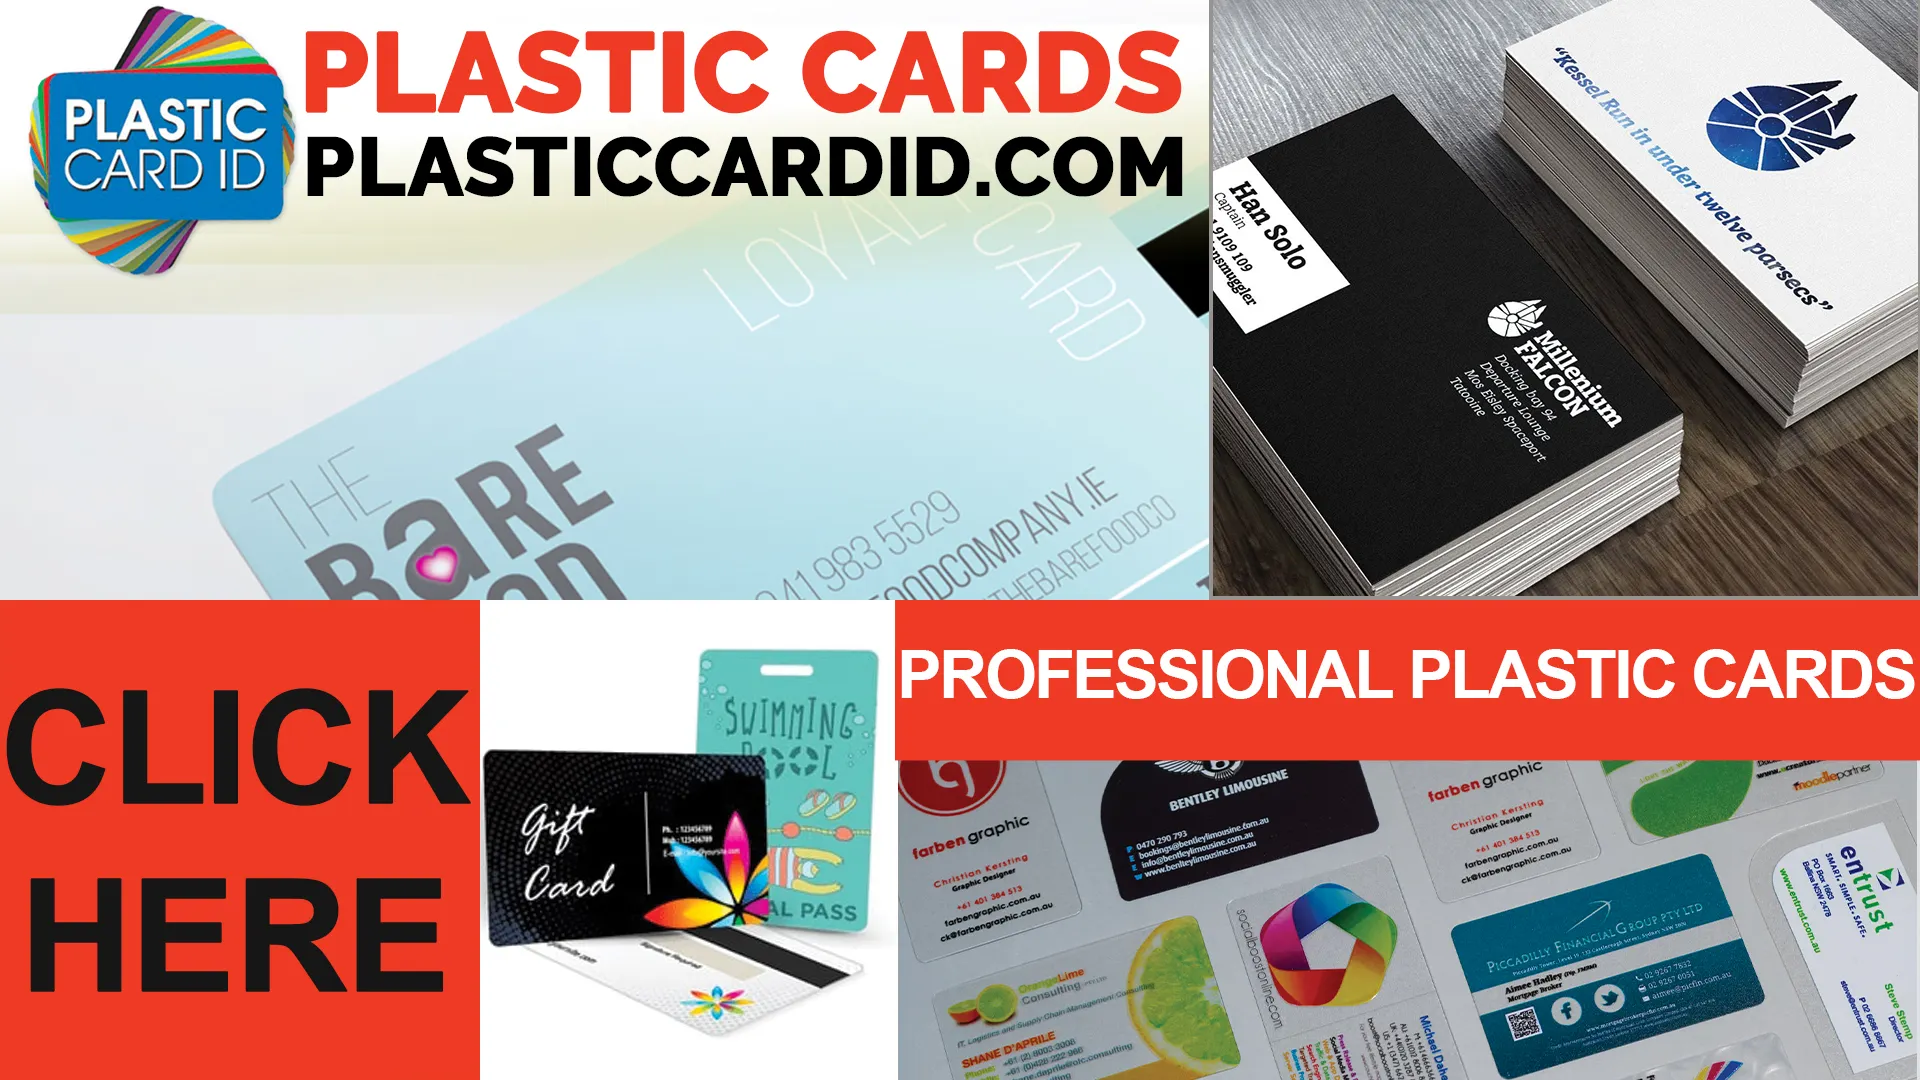 Plastic Card ID
's Commitment: Beyond the Card